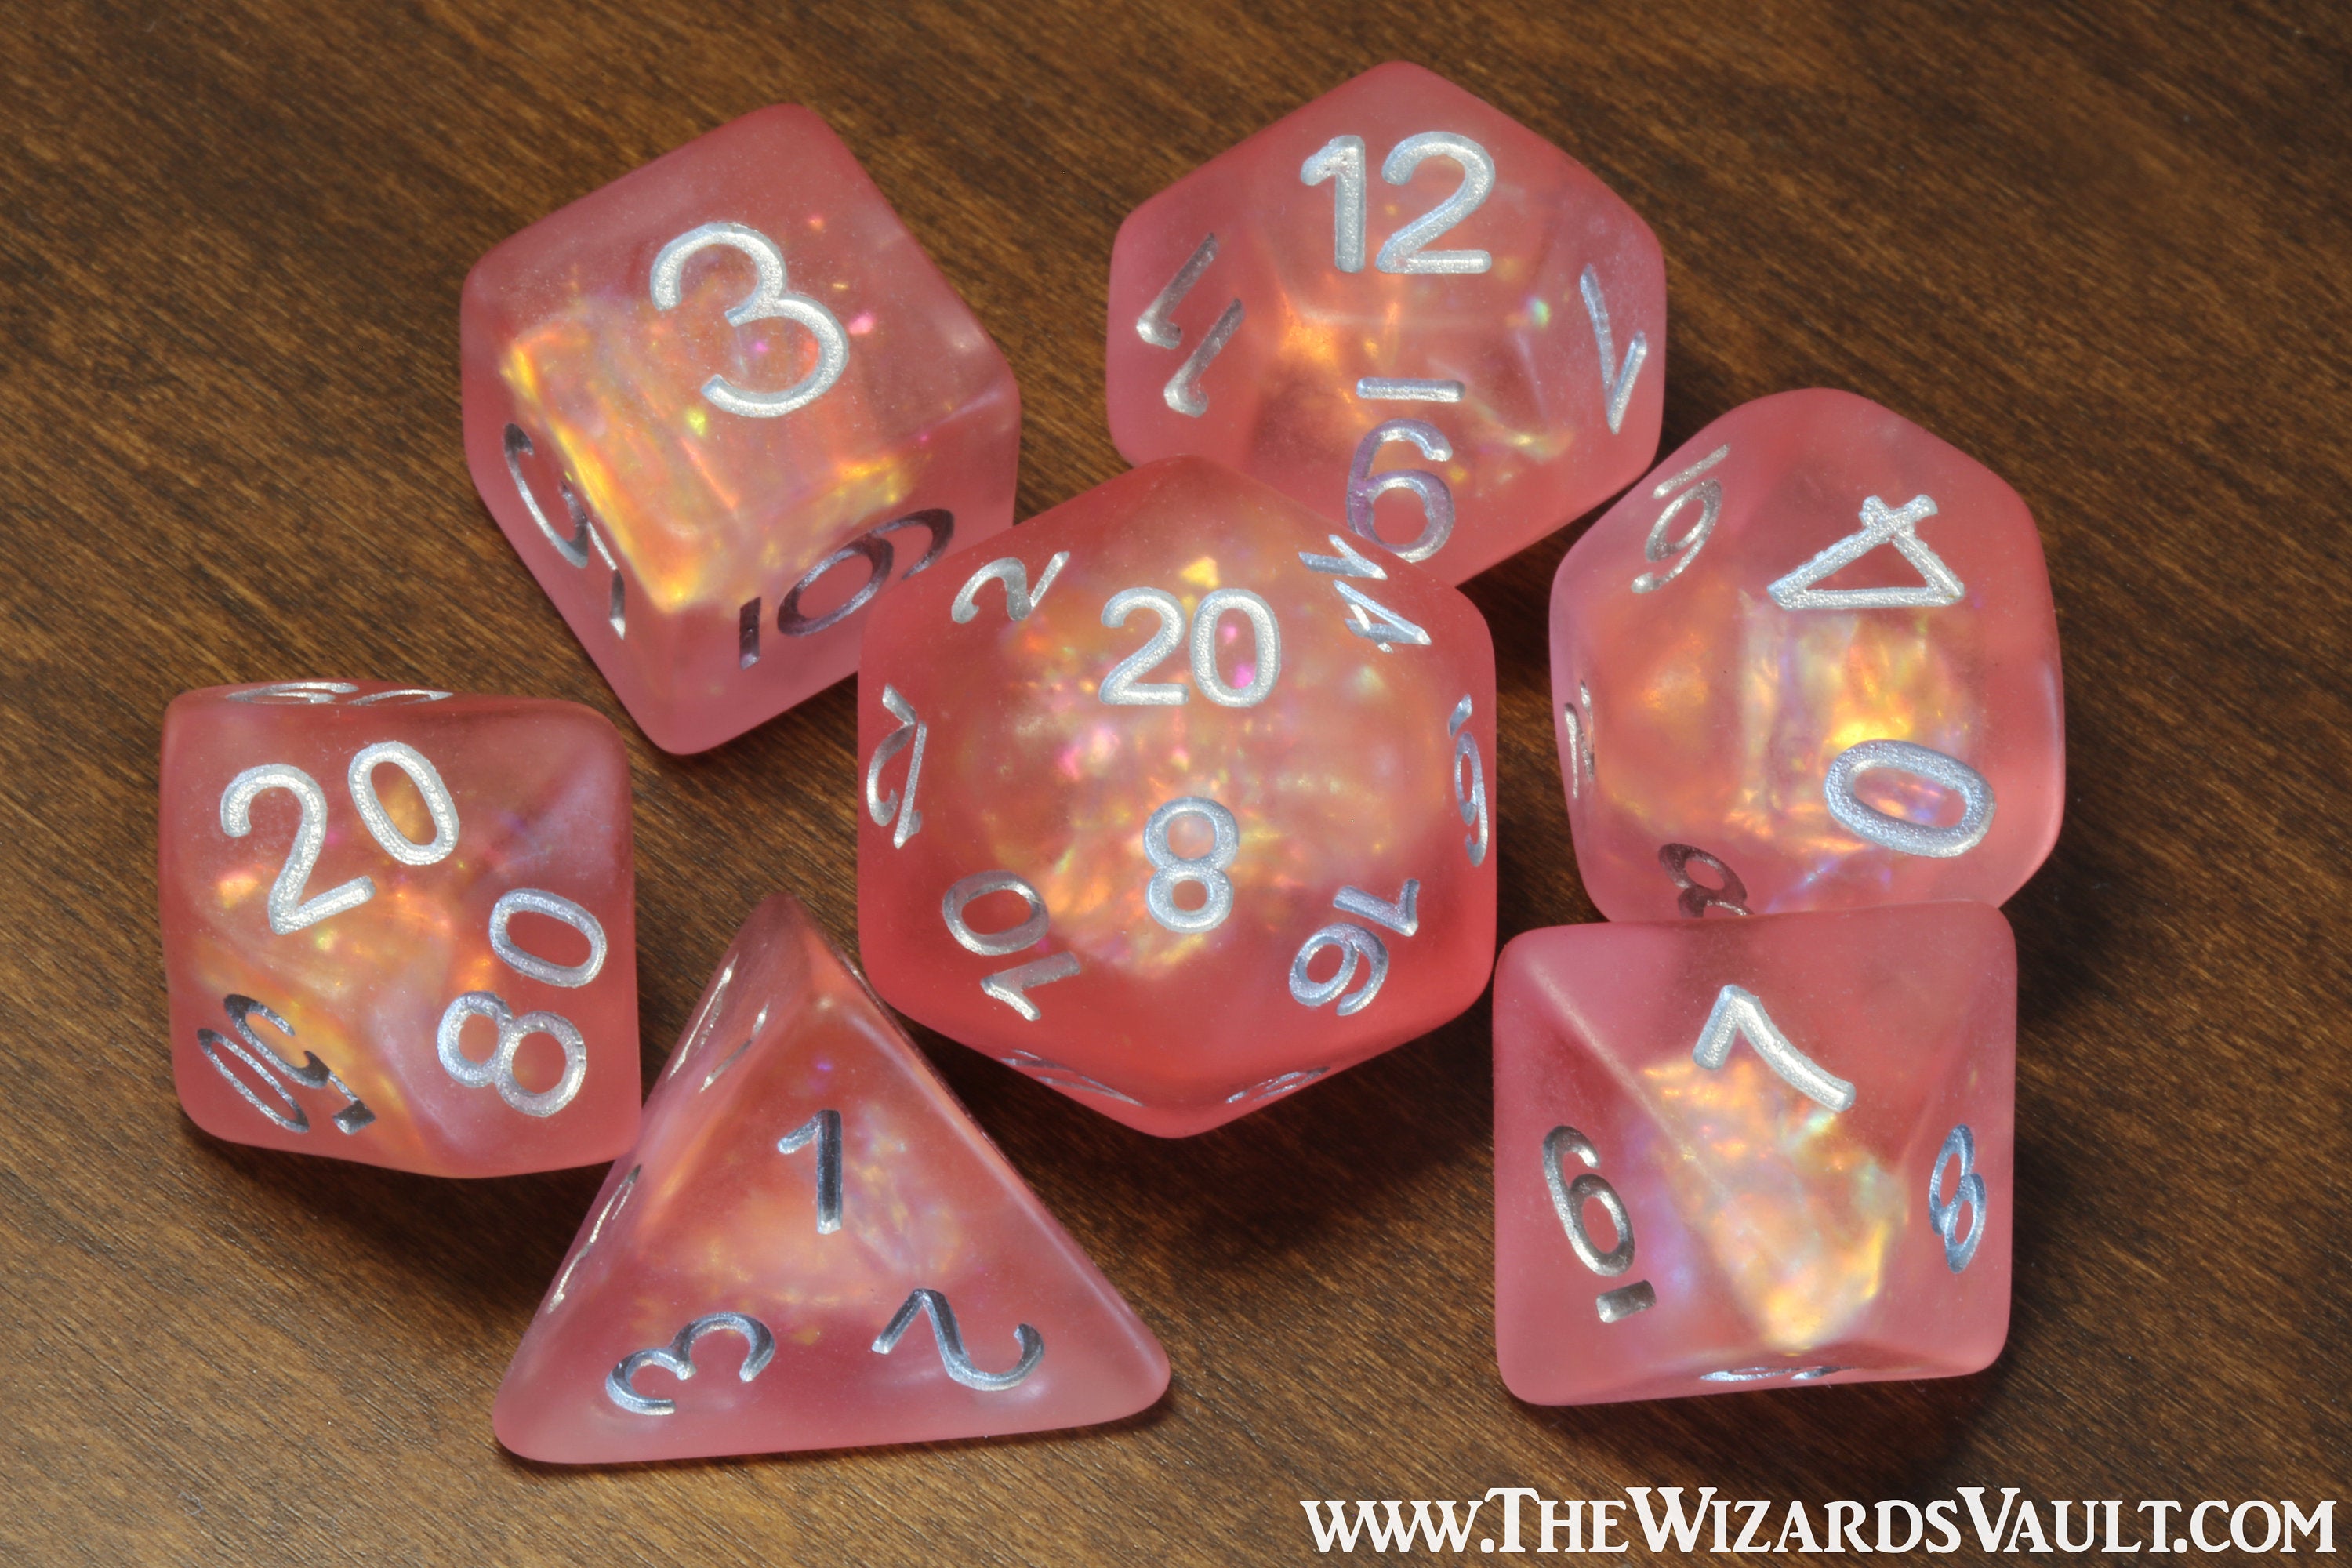 Fire Faerie dice set - Frosted dice set with Holographic inclusions